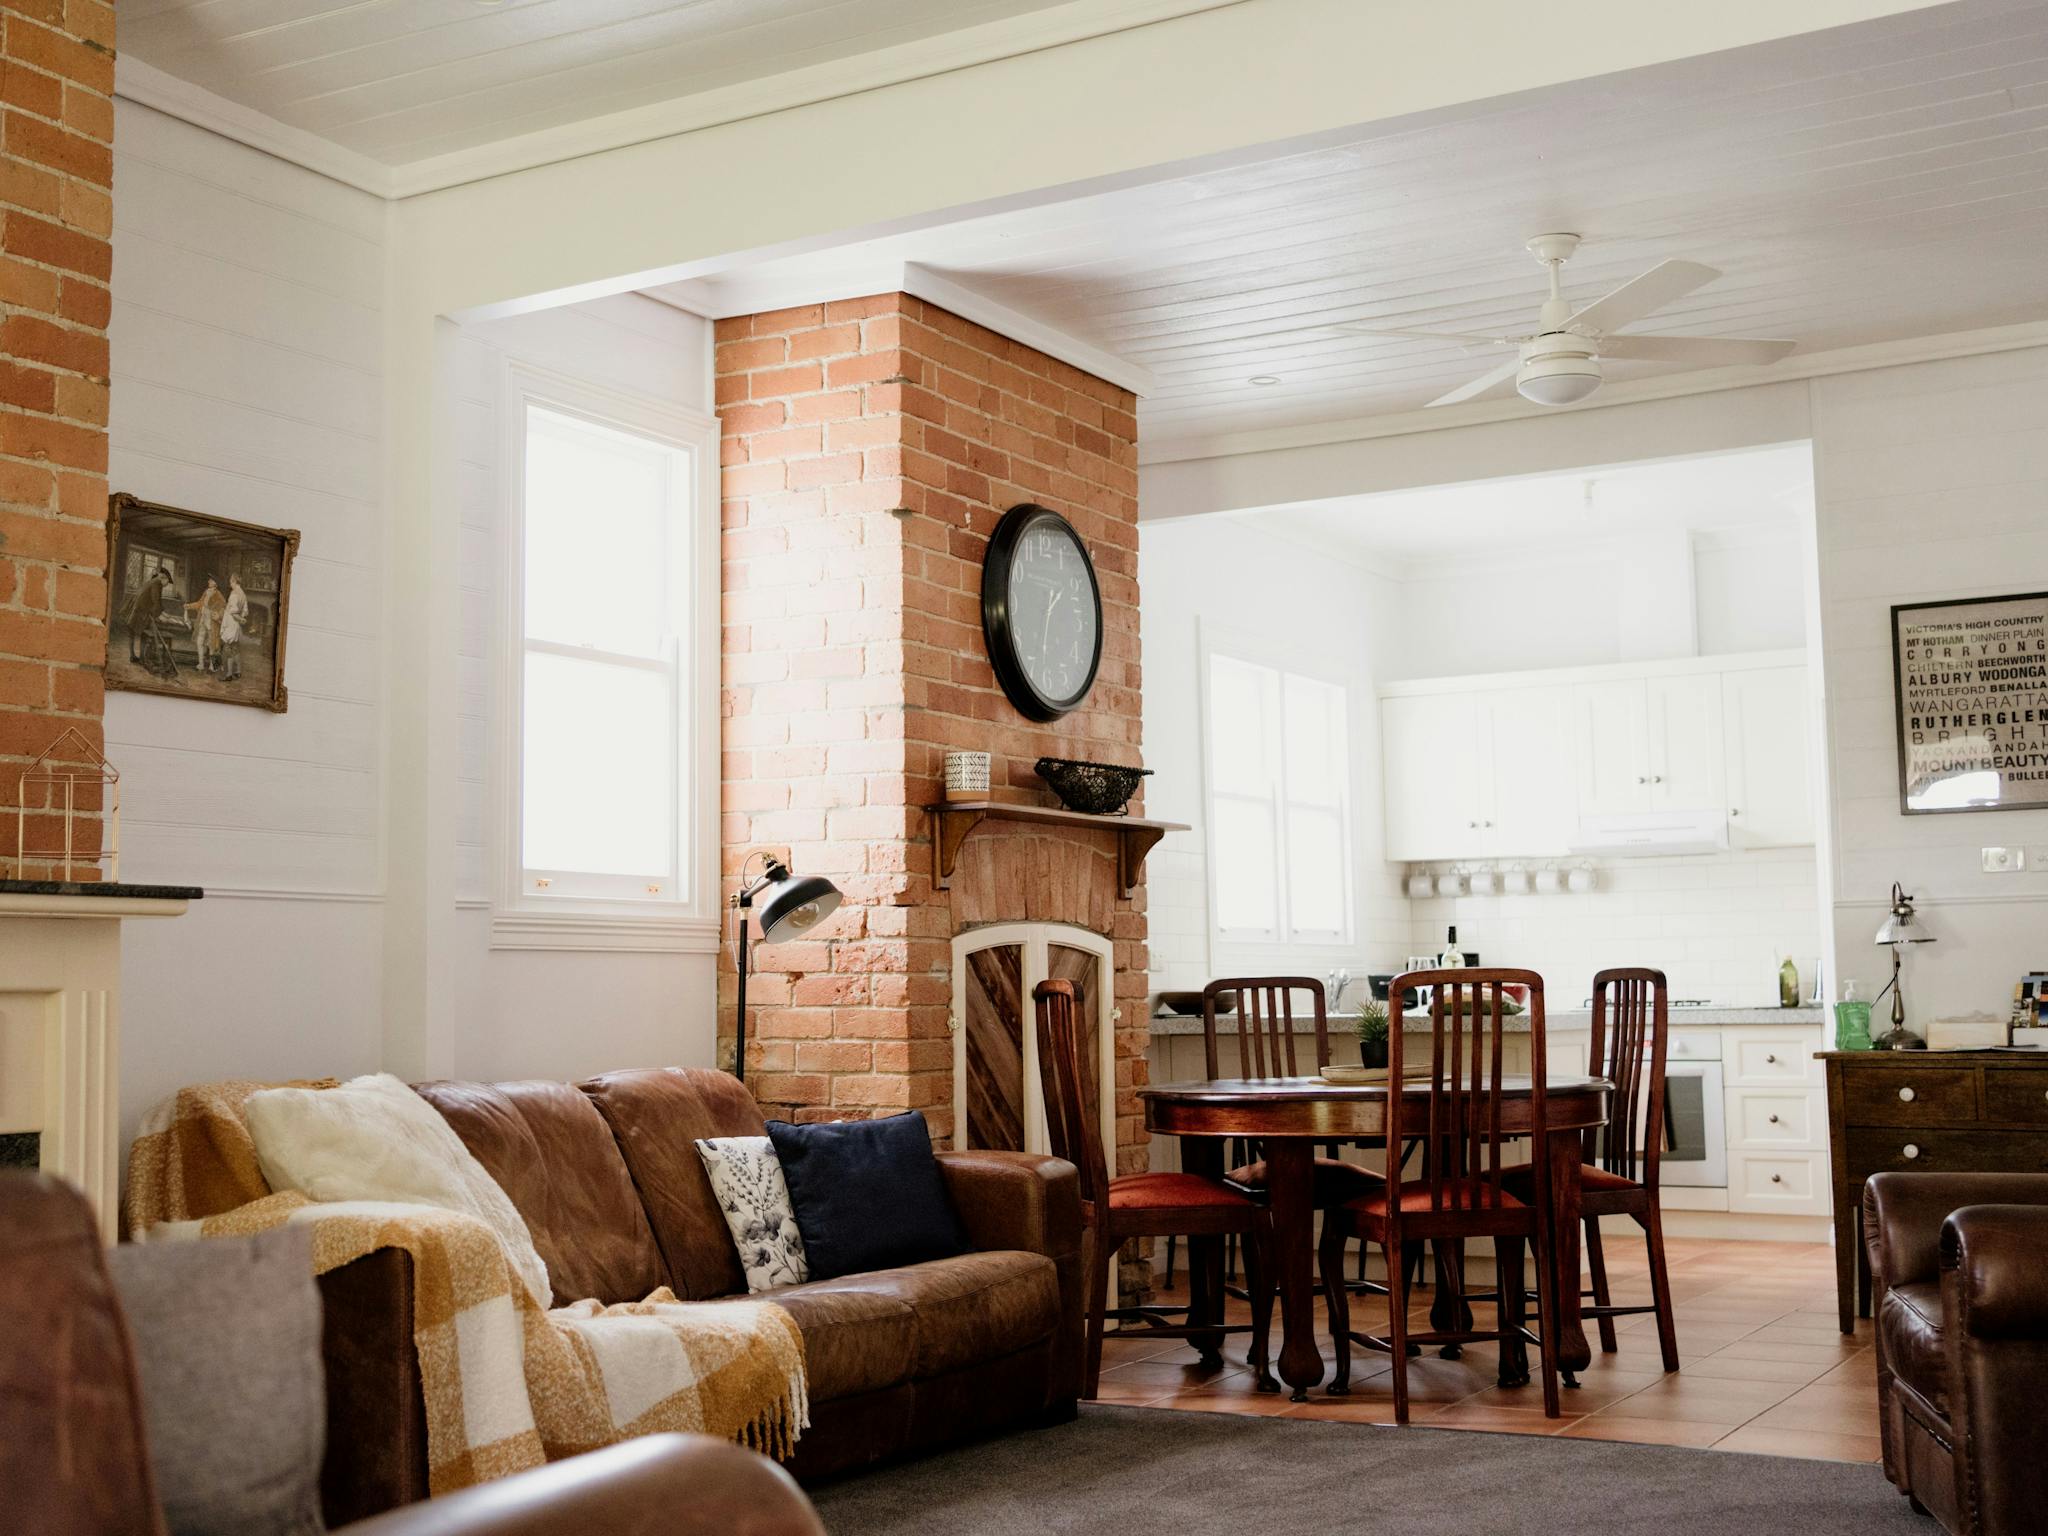 Enjoy the carefully curated olde world furniture at The Cottage on Gray Wangaratta